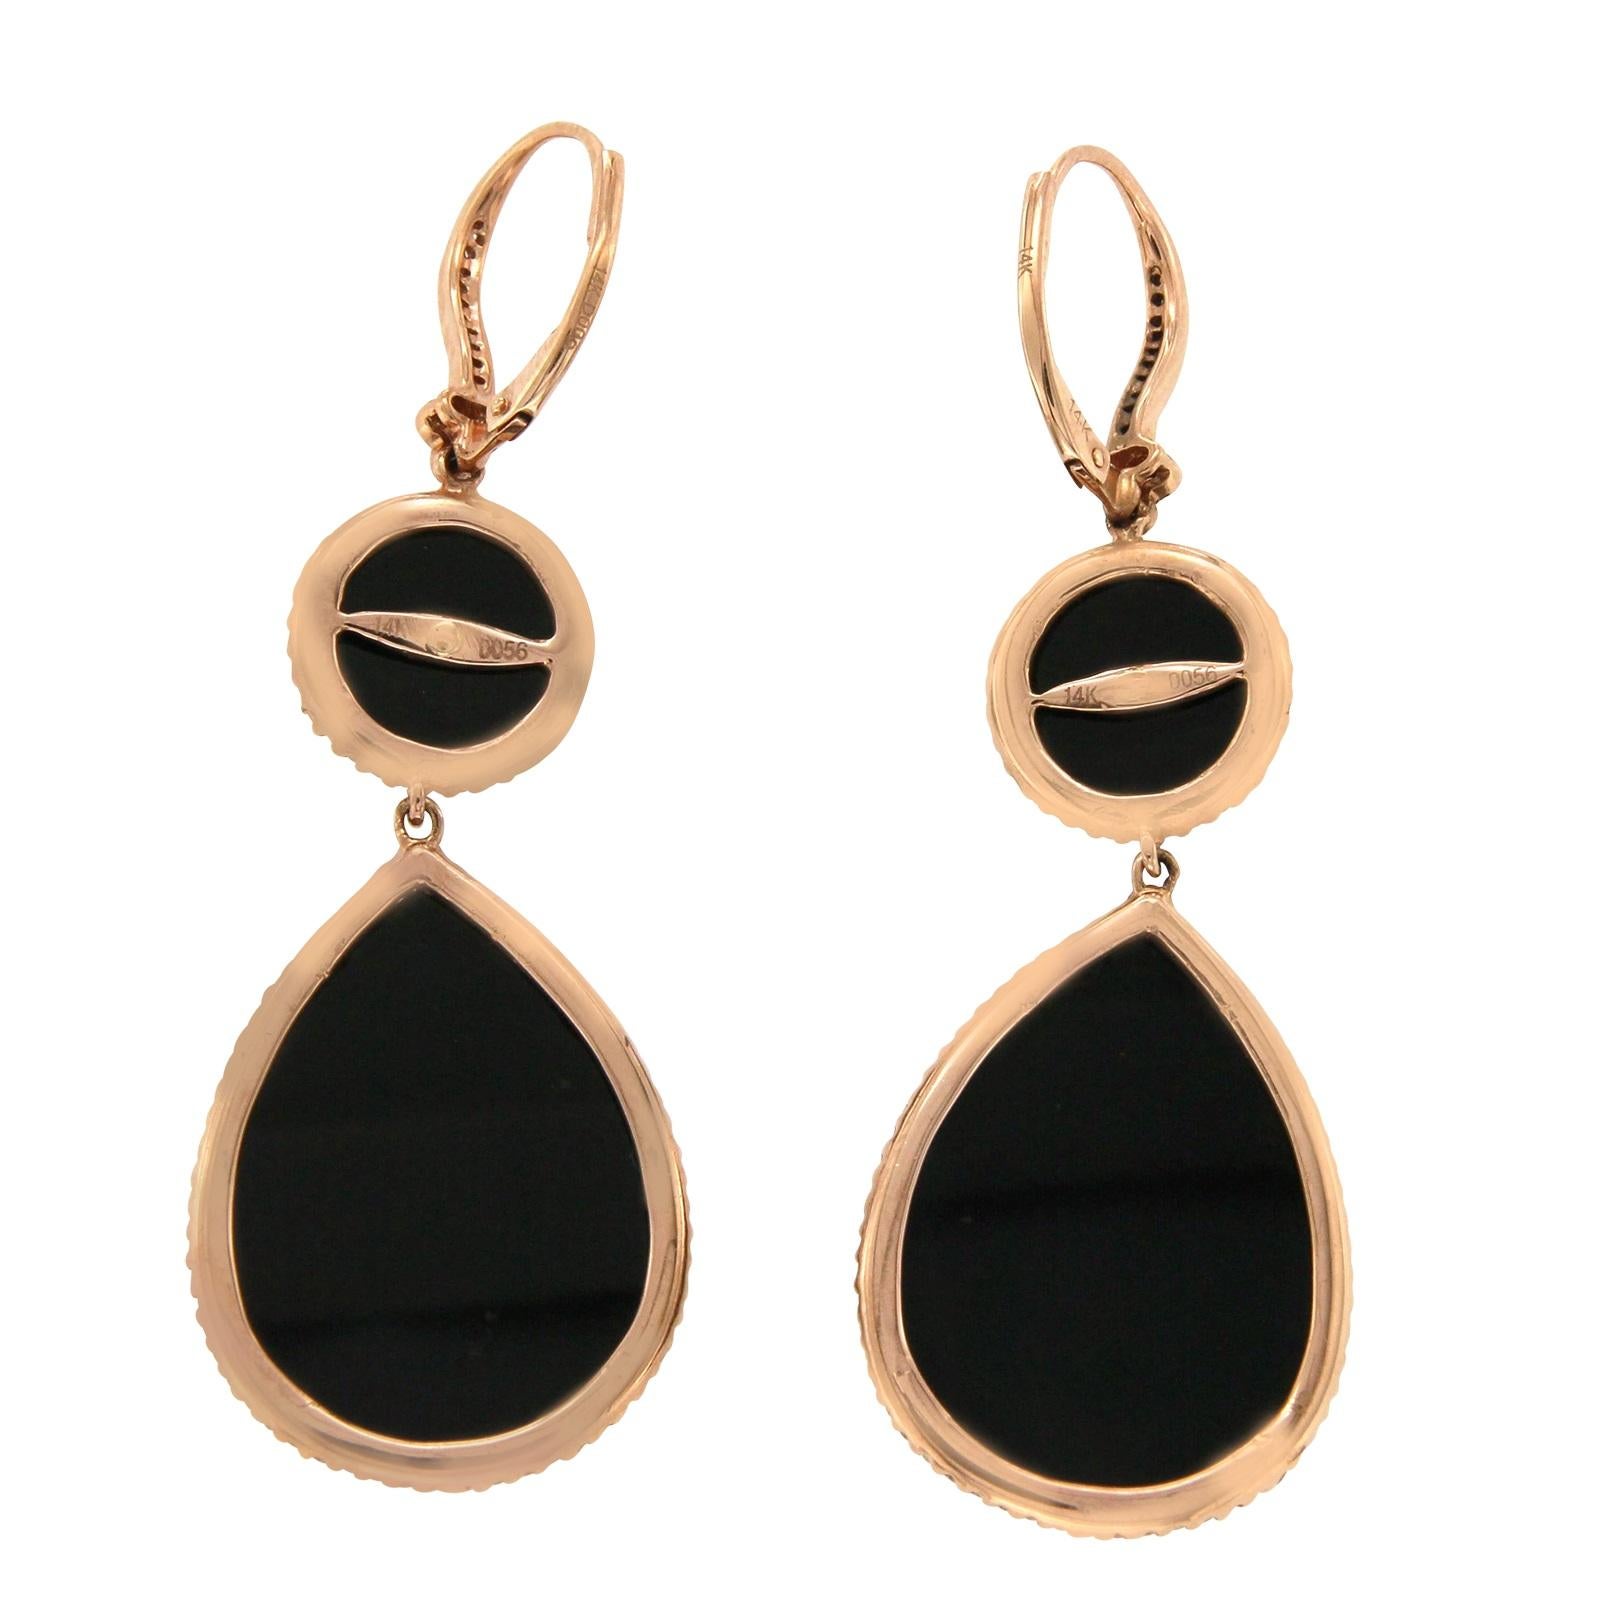 Type: Earrings
Height: 54.4 mm
Width: 19.5 mm
Metal: Rose Gold
Metal Purity: 14K
Hallmarks: 14K
Total Weight:11.1 Grams
Stone Type: 28 CT Black Onyx and 0.56 CT I I1 Diamonds
Condition: New
Stock Number: NP1